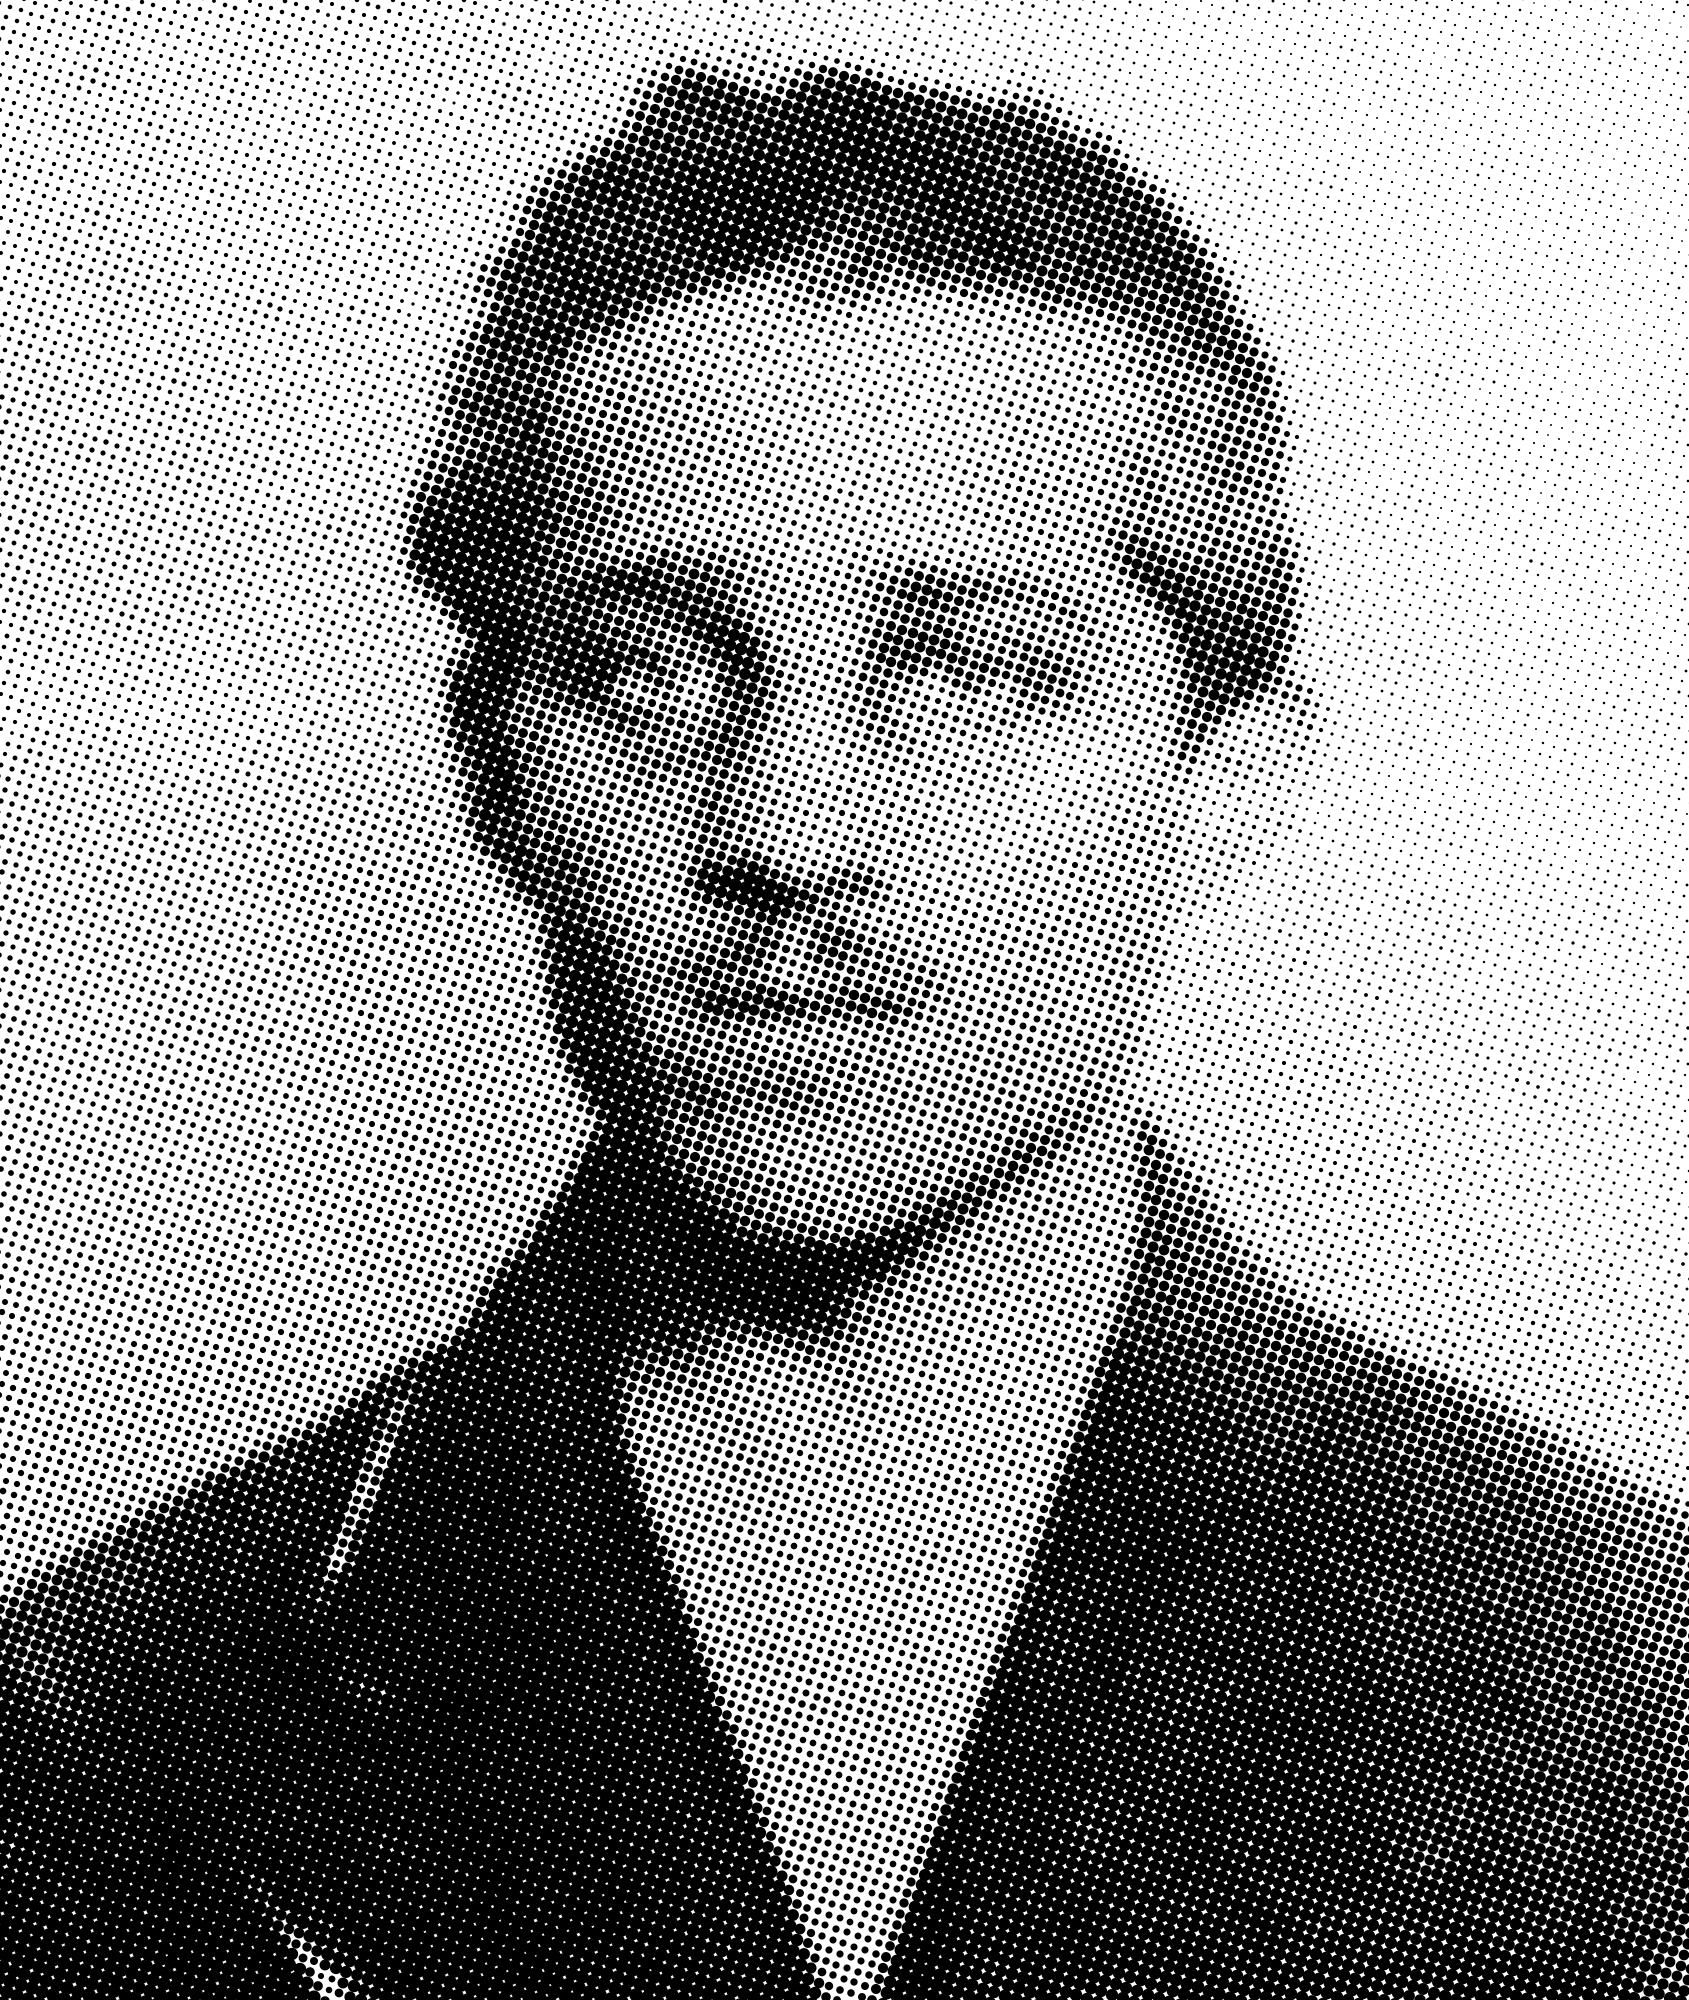 An undated picture acquired from the Historical Archives of Sarajevo on June 28, 2014 shows Bosnian-Serb Gavrilo Princip in his prison cell at the Terezín fortress after his arrest. Born a peasant boy in 1894 in the remote mountain village of Obljaj, Princip was a passionate Serb and Slav nationalist whose assassination of Archduke Franz Ferdinand in Sarajevo, 100 years ago this June 28, is widely considered to have sparked World War I. AFP PHOTO/HISTORICAL ARCHIVES OF SARAJEVO